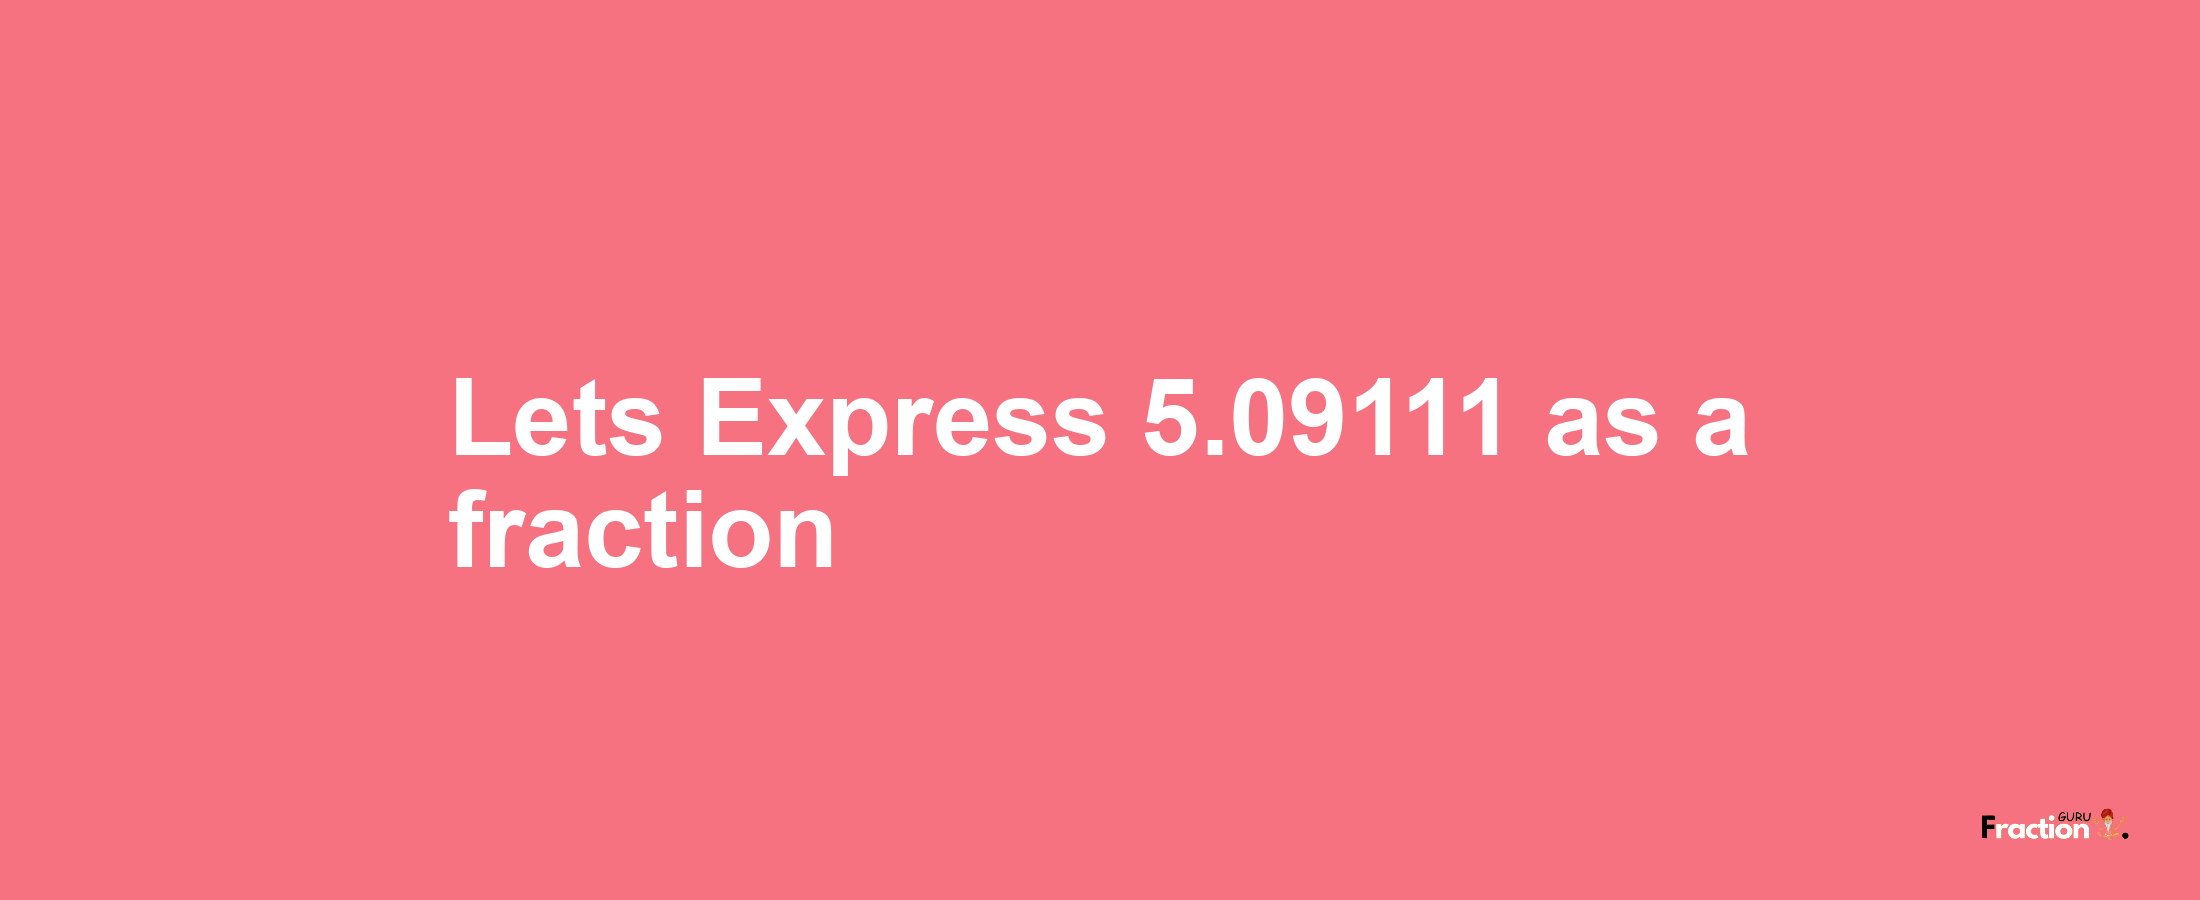 Lets Express 5.09111 as afraction